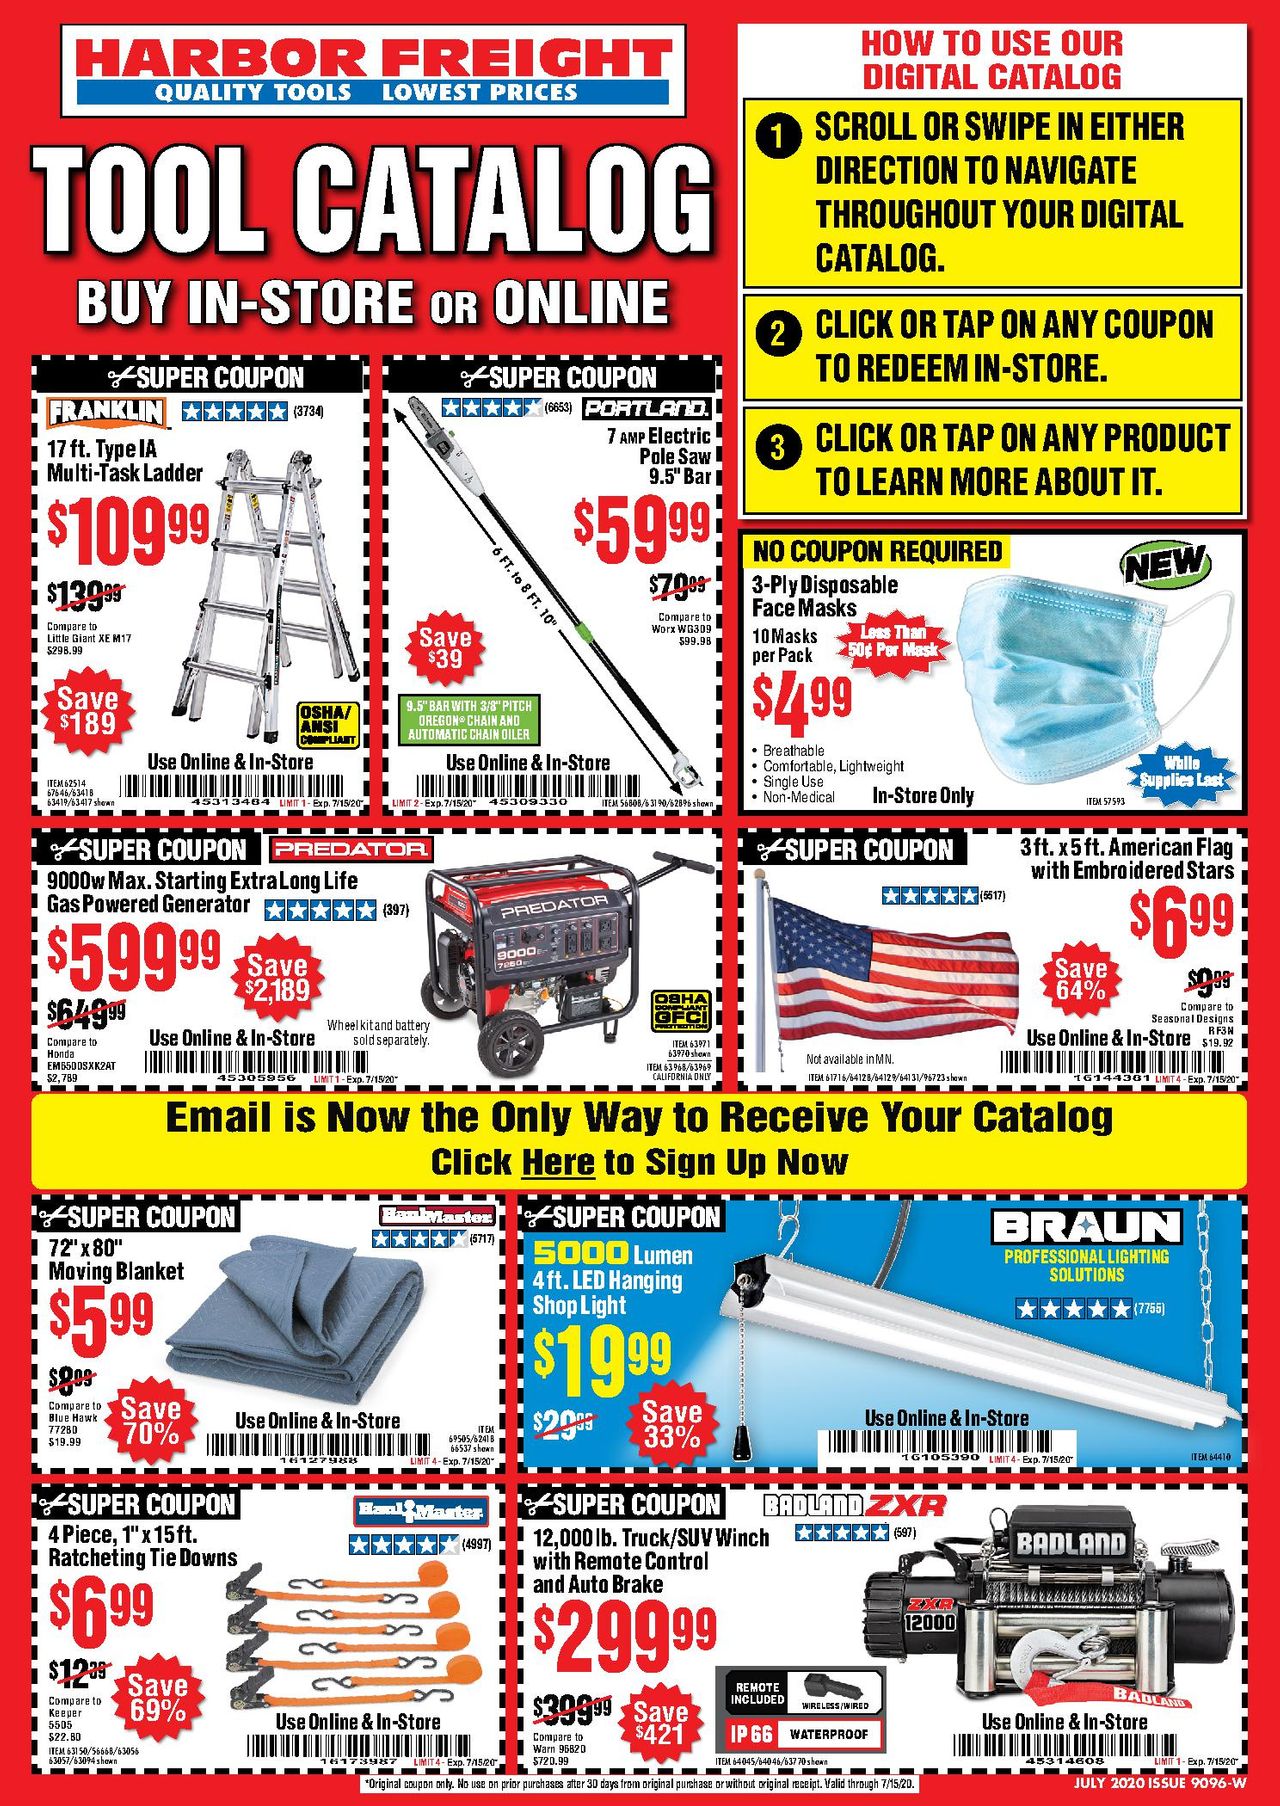 Harbor Freight Tools - July Catalog - 07/01/20 | us ...